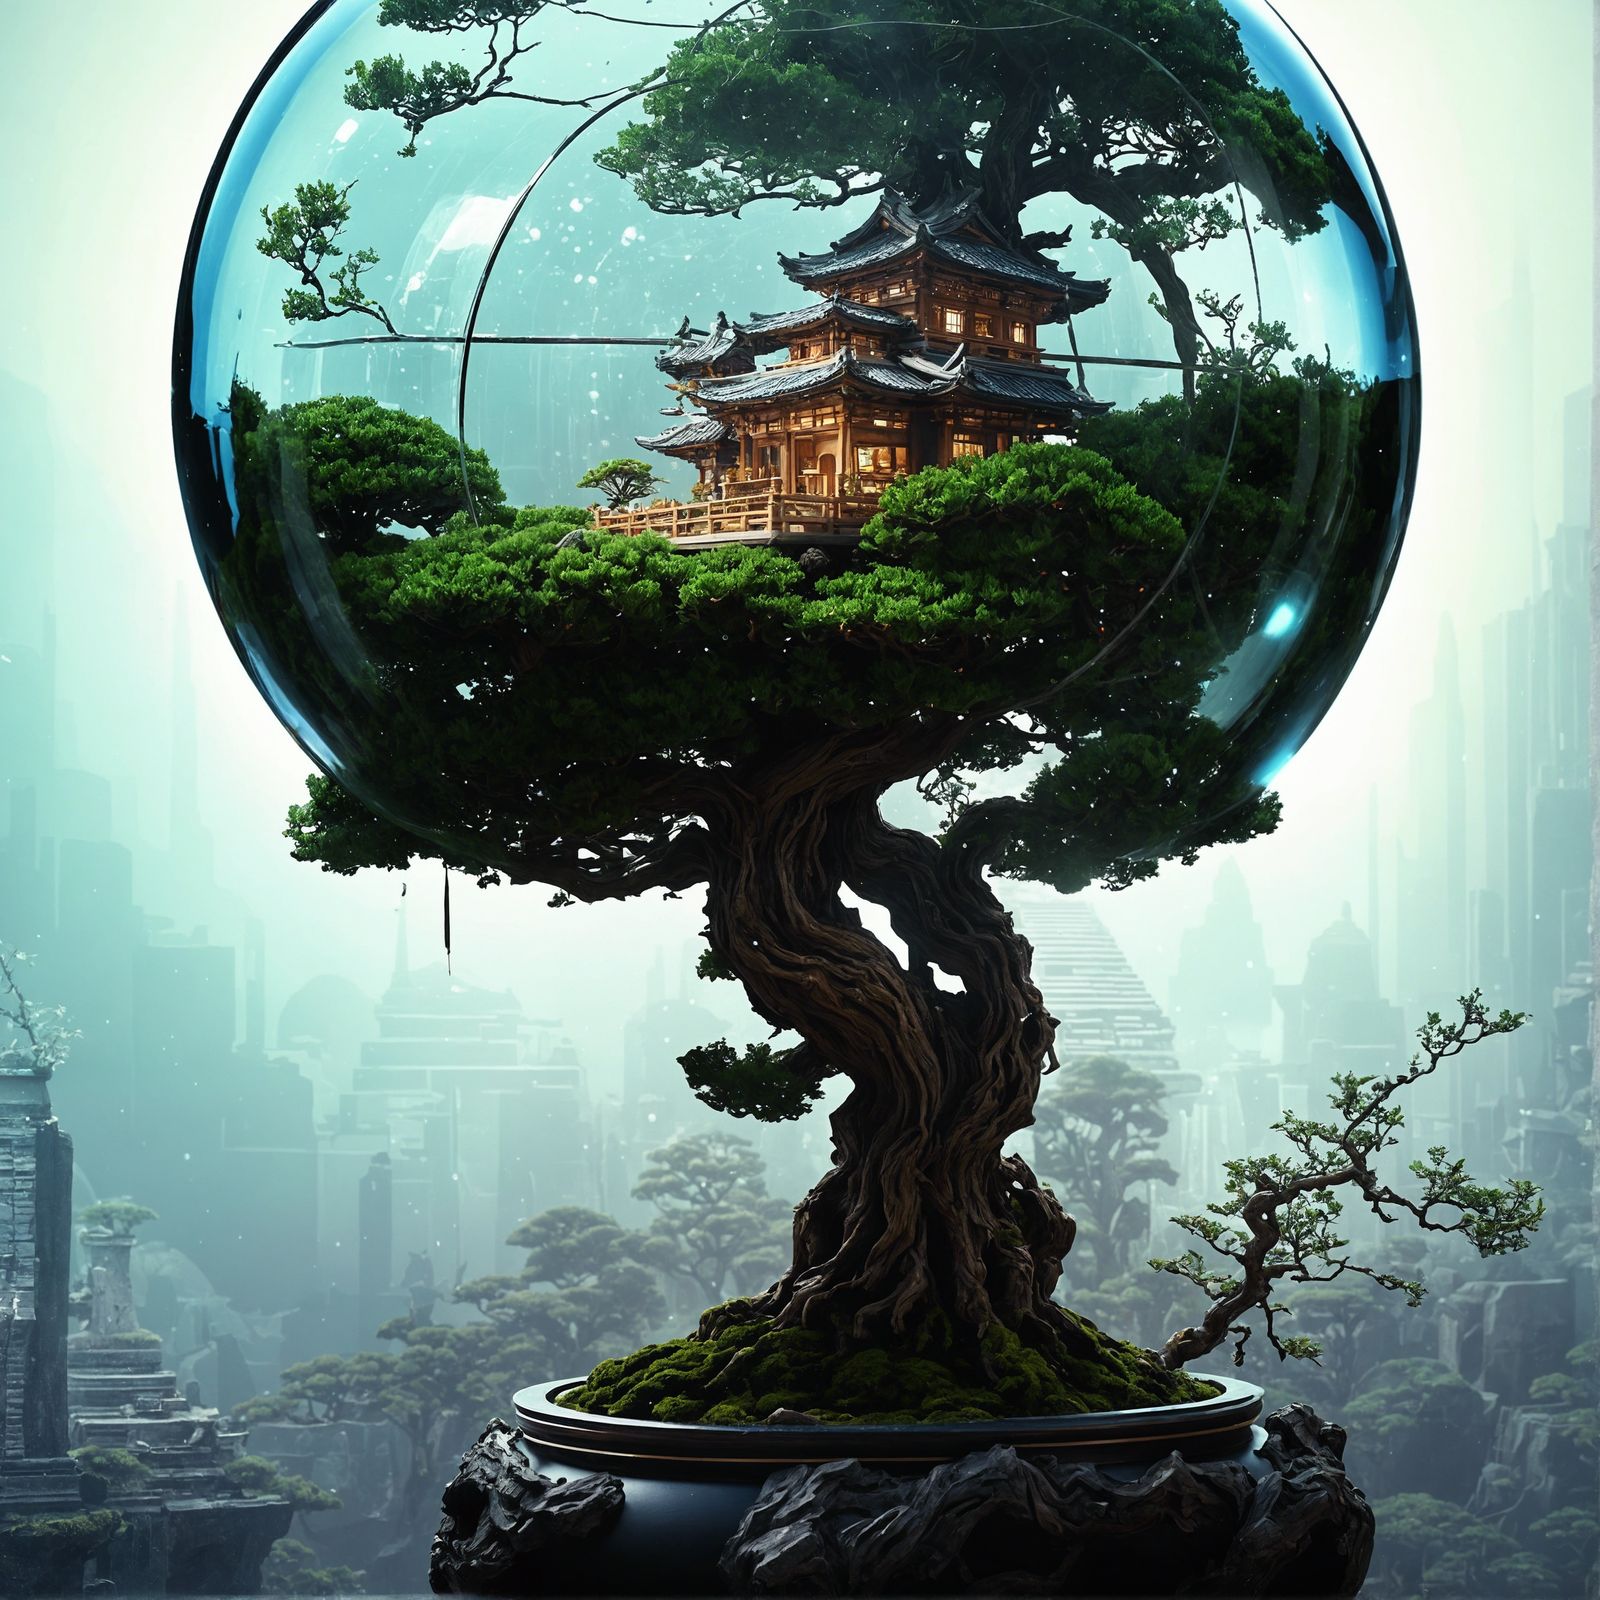 bonsai on a sphere (remake with the creative upscale)